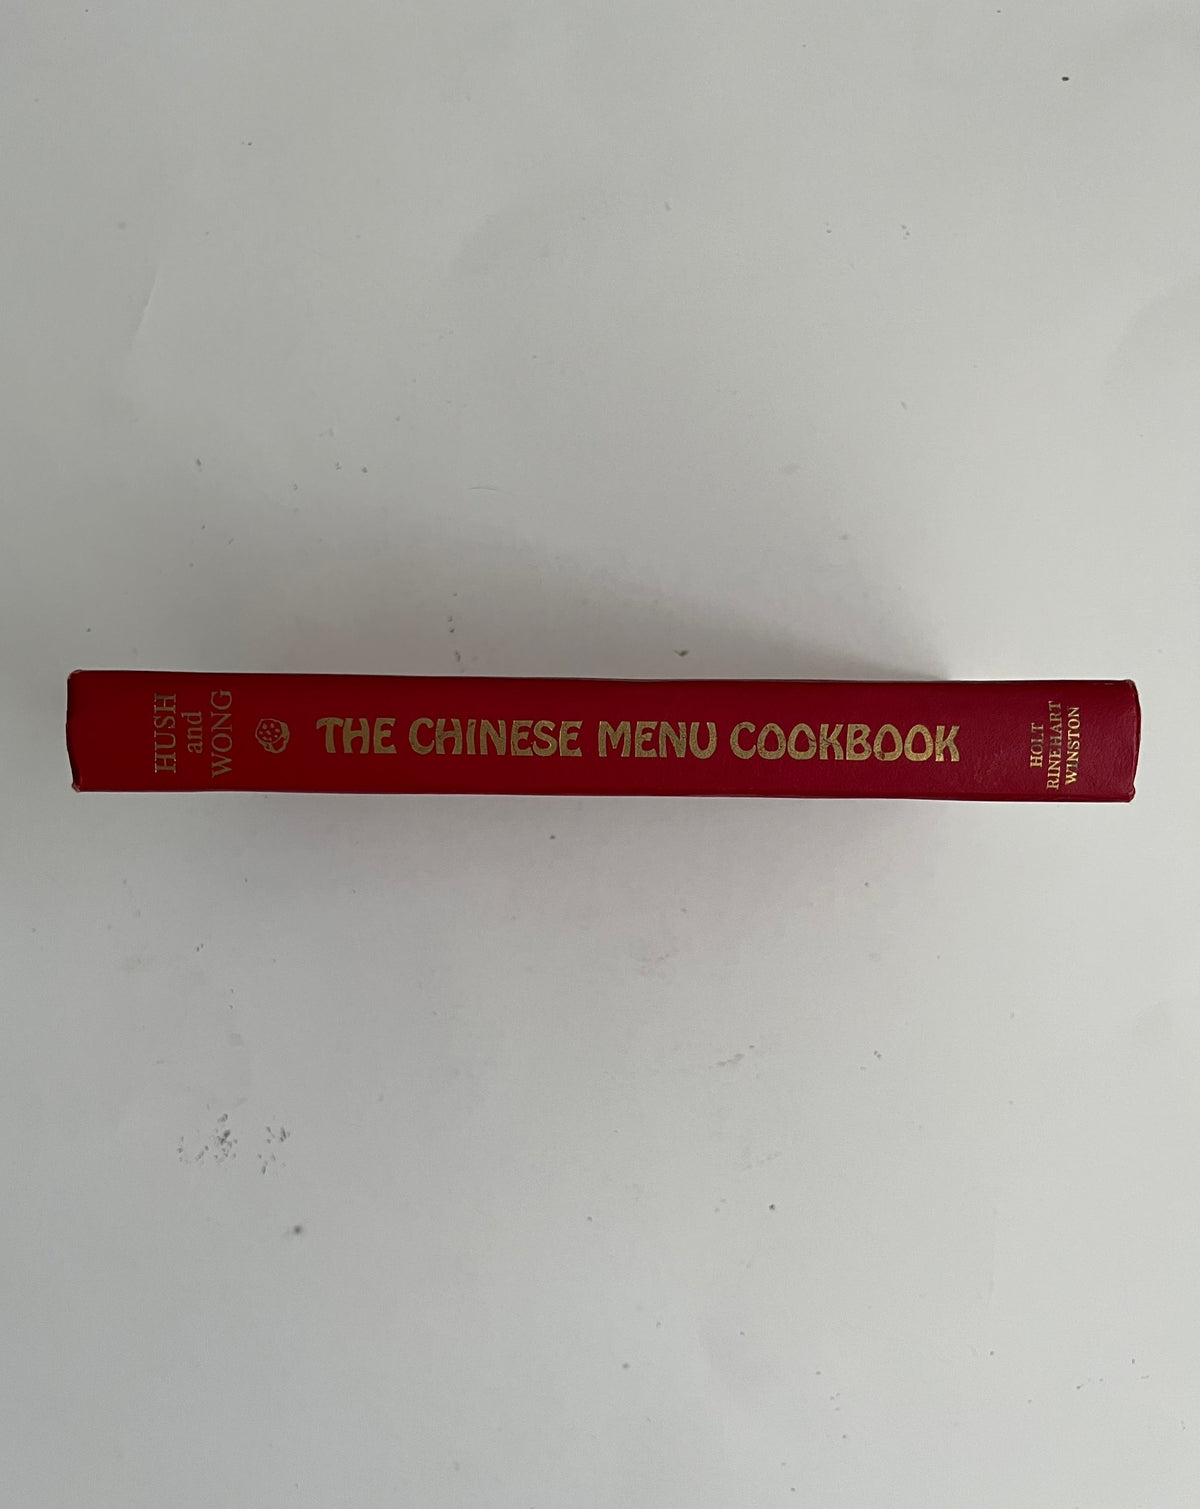 The Chinese Menu Cookbook by Joanne Hush &amp; Peter Wong